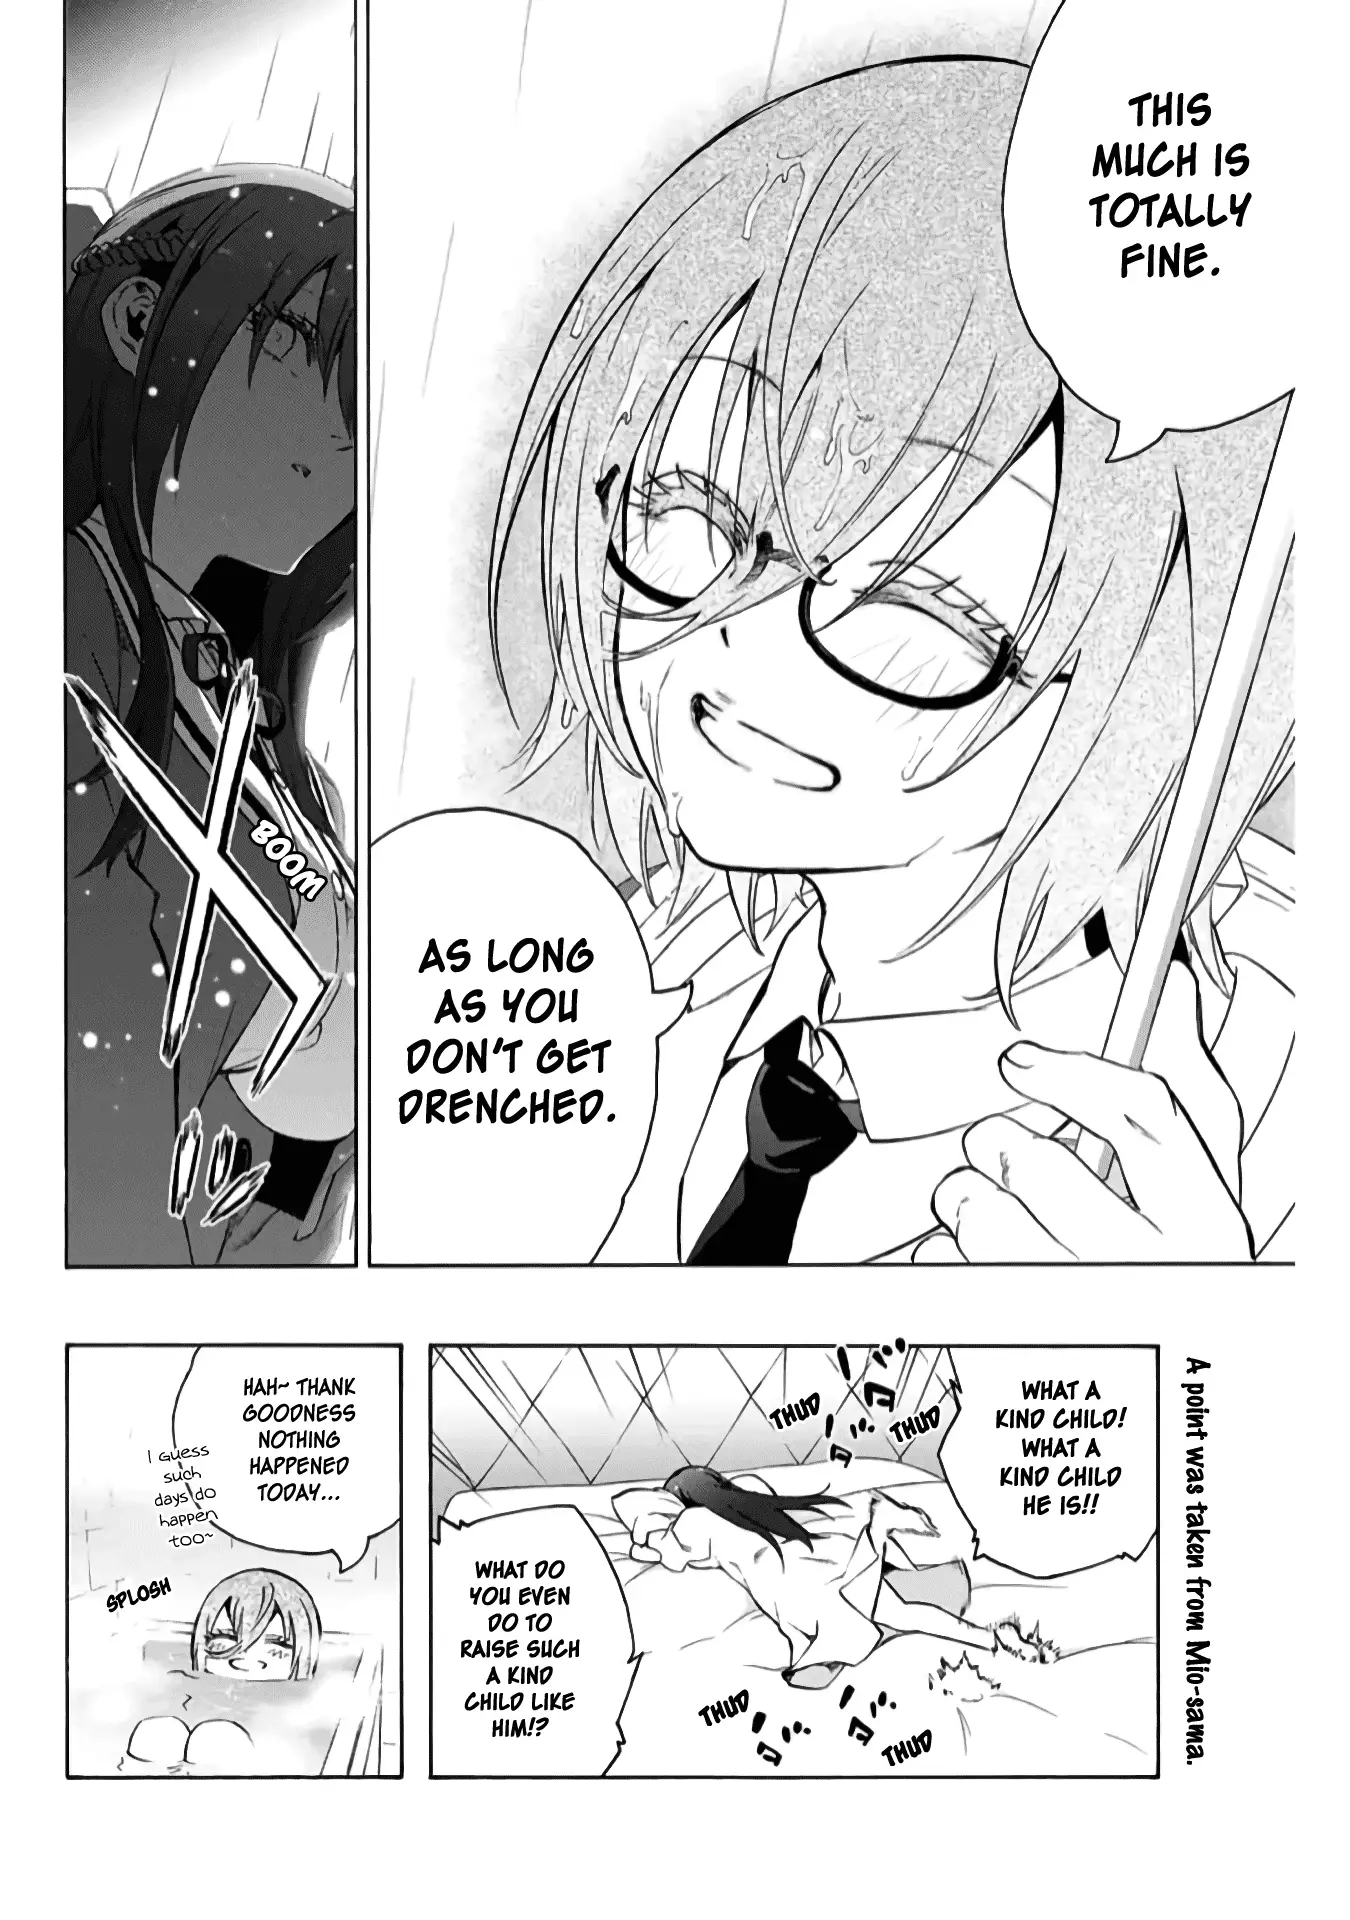 My Senpai Is After My Life - 8 page 4-8bb02588